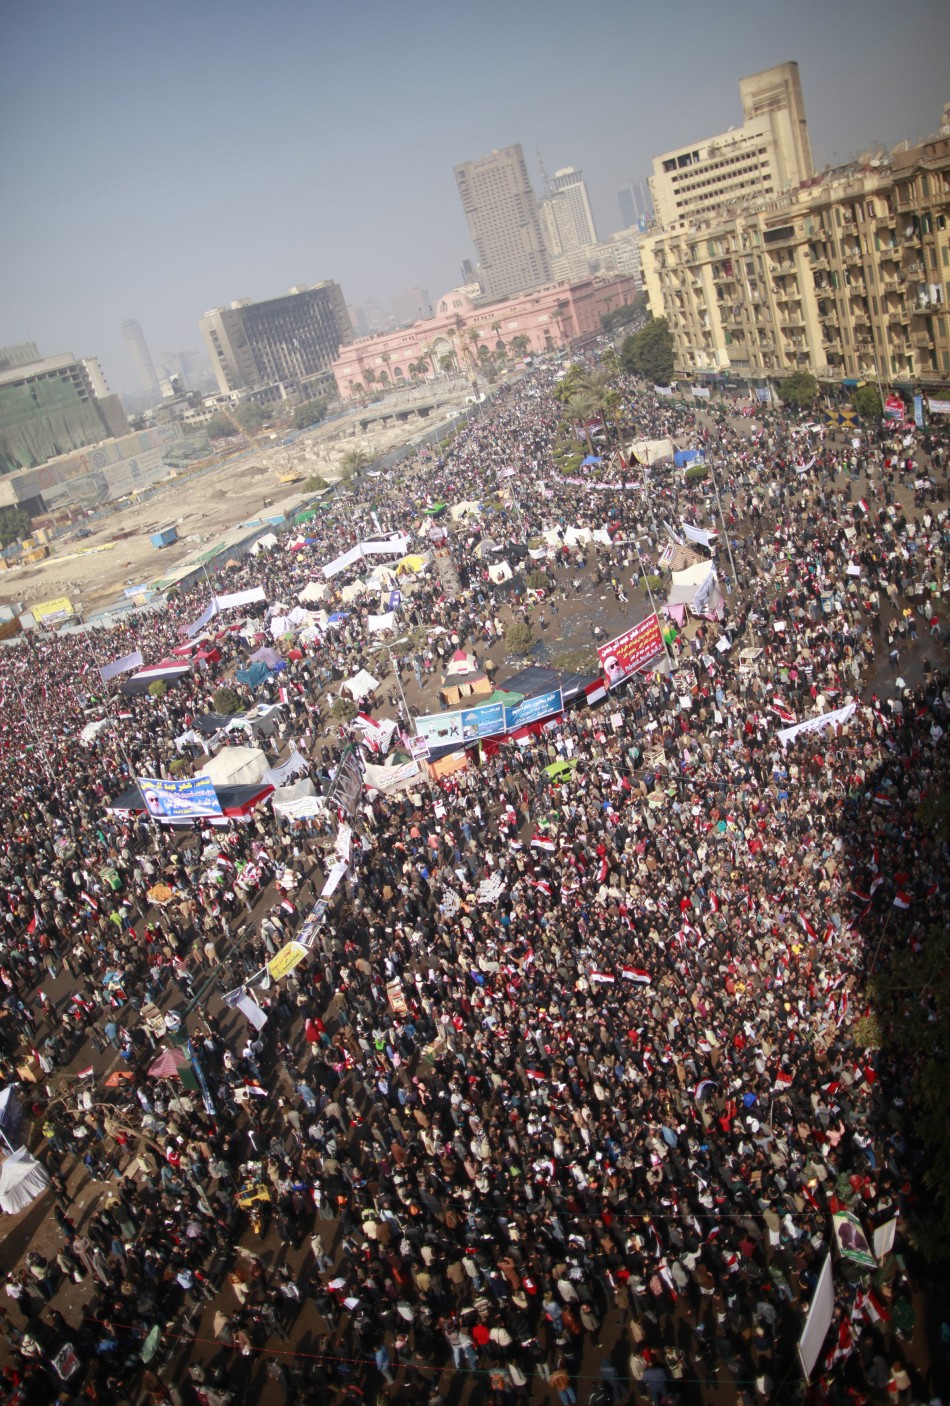 Demonstrators gather at Tahrir Square during a protest marking the first anniversary of Egypts uprising in Cairo